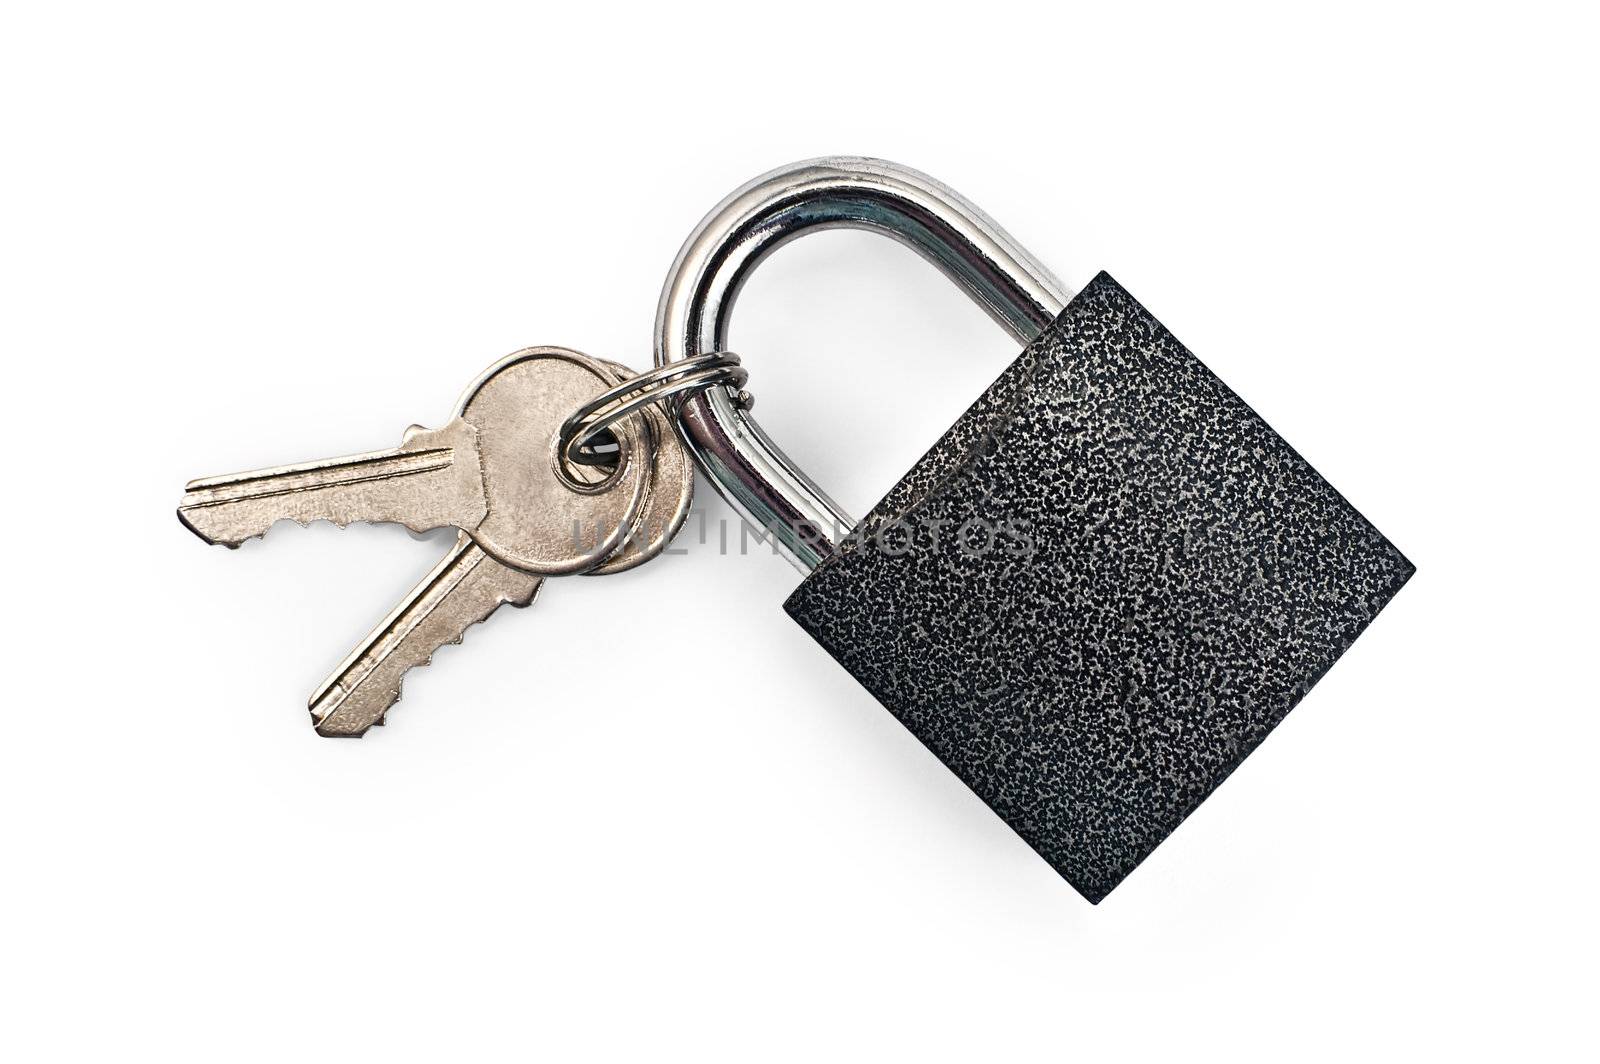 Black padlock with keys isolated on a white background